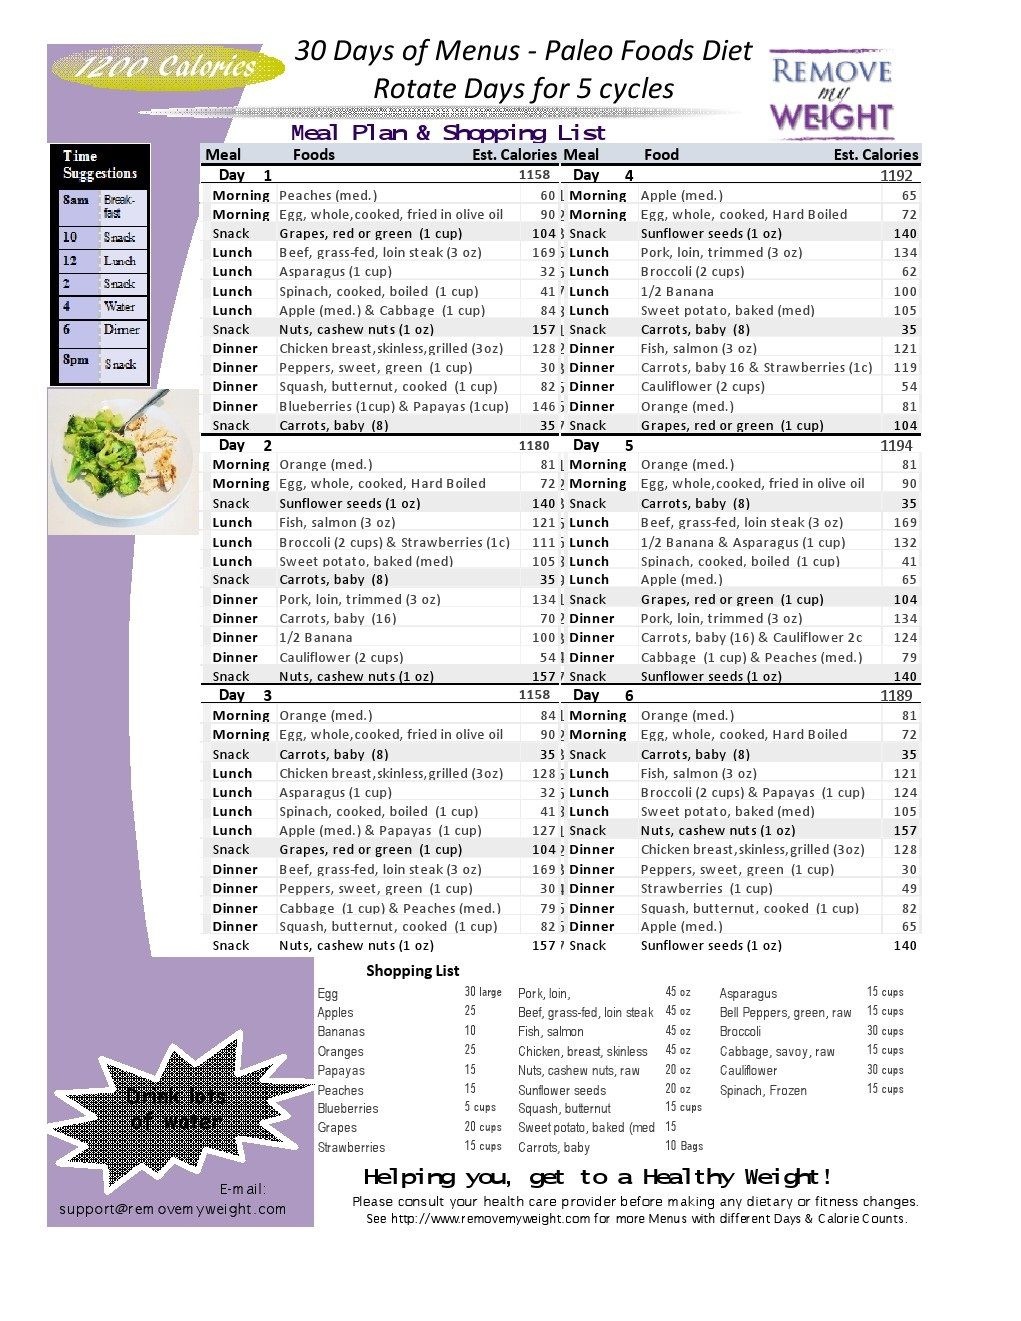 1200 Calories 30 Day Paleo Diet With Shopping List – Printable In - Free Printable 1200 Calorie Diet Menu